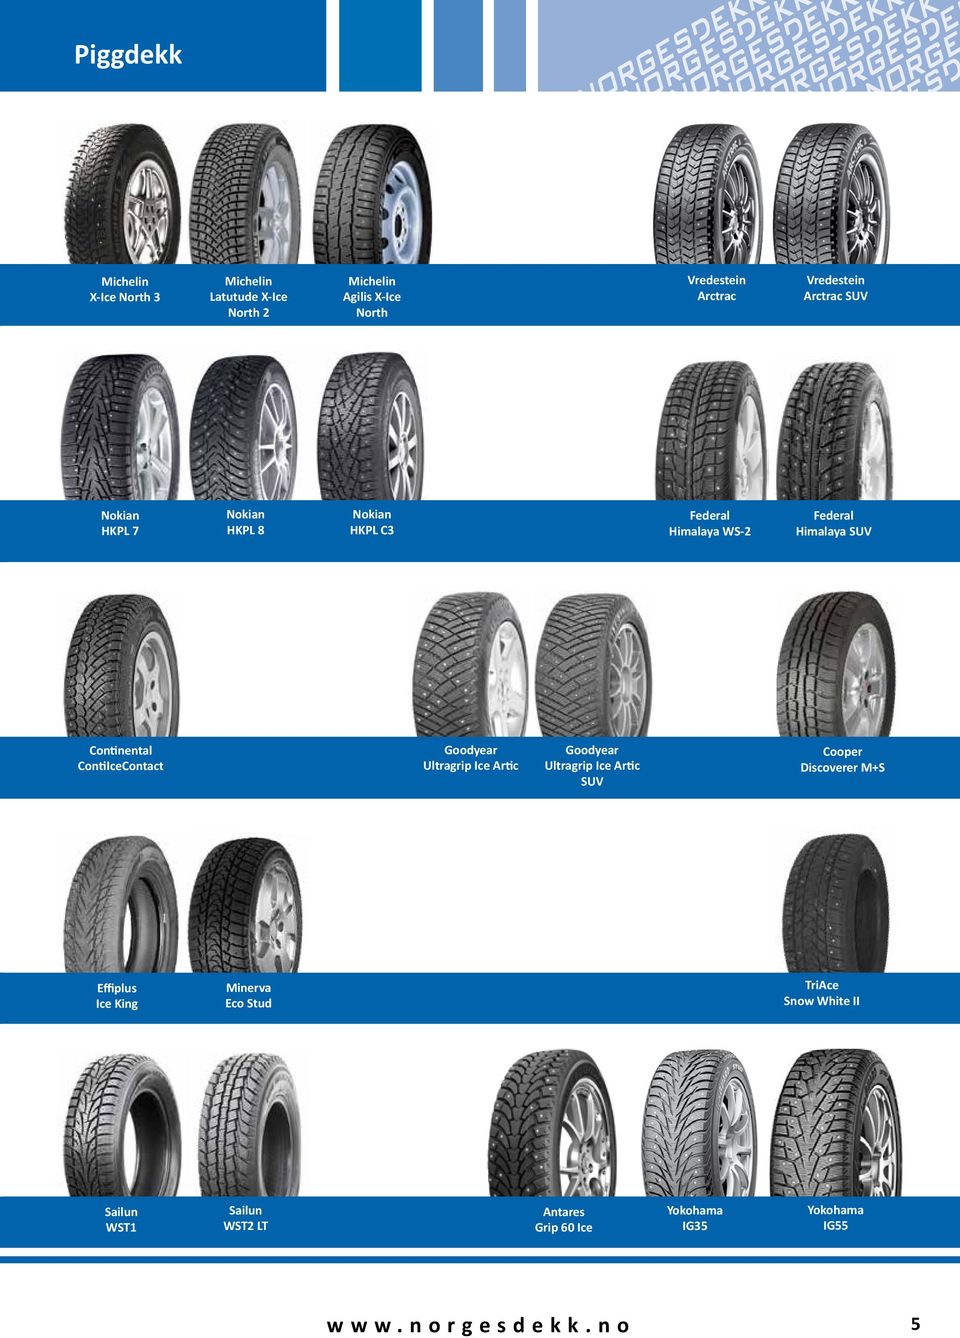 Continental ContiIceContact Goodyear Ultragrip Ice Artic Goodyear Ultragrip Ice Artic SUV Cooper Discoverer M+S